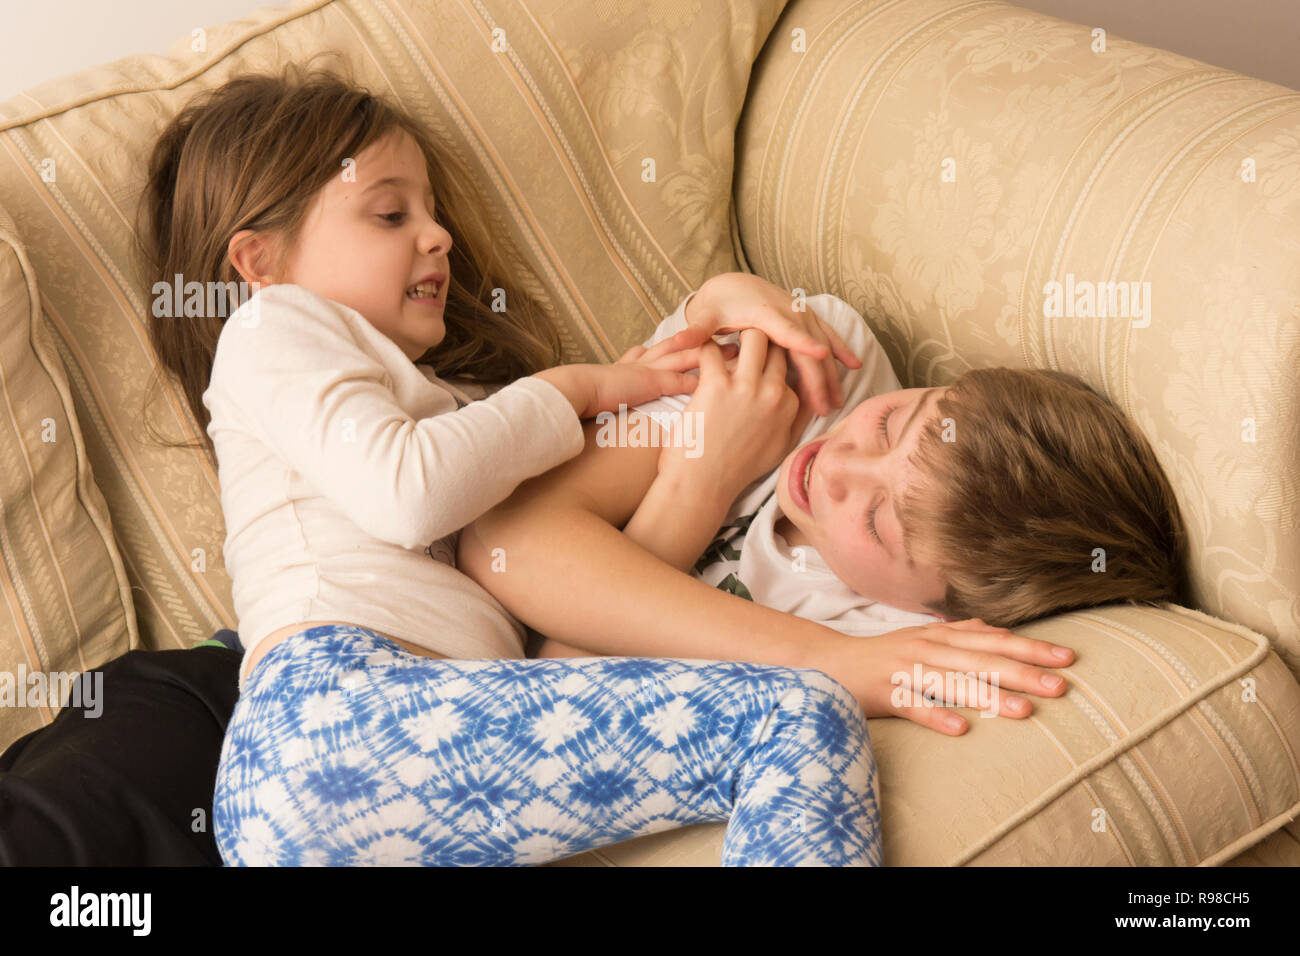 children, boy and girl, brother and sister, siblings, play-fighting, fighting, wrestling, noisy, violent, on sofa, twelve years old, six years old. Stock Photo